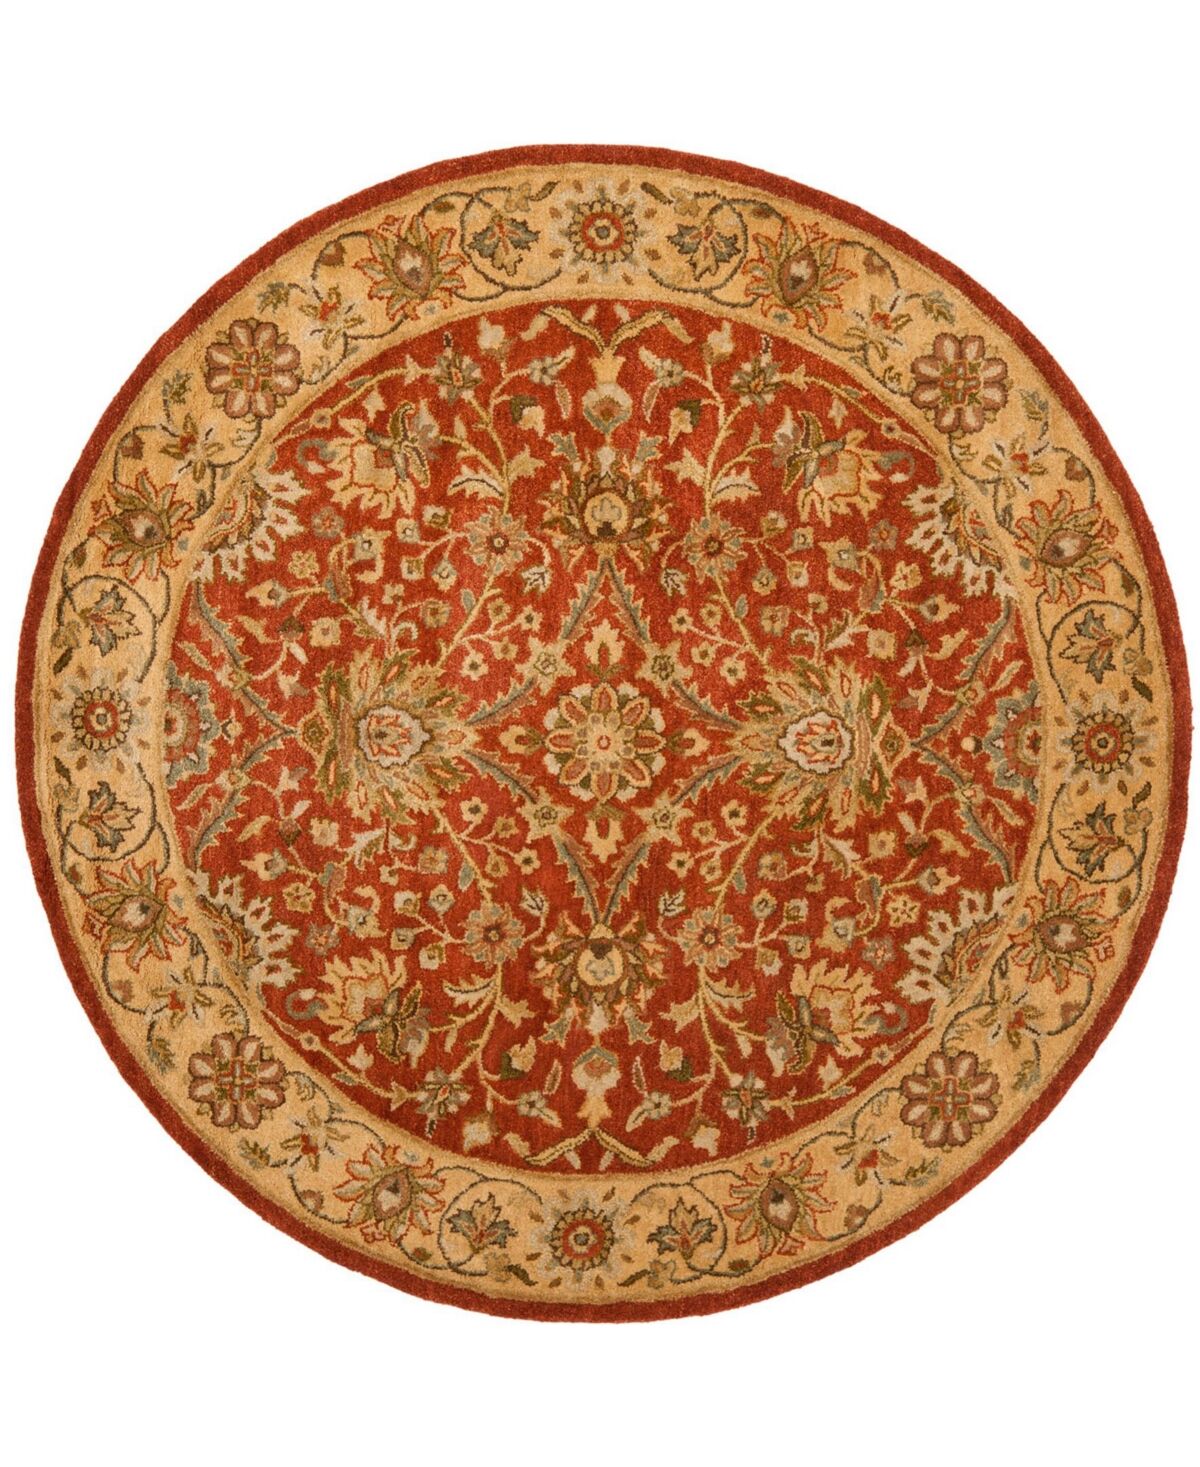 Safavieh Antiquity At249 Rust and Gold 8' x 8' Round Area Rug - Rust